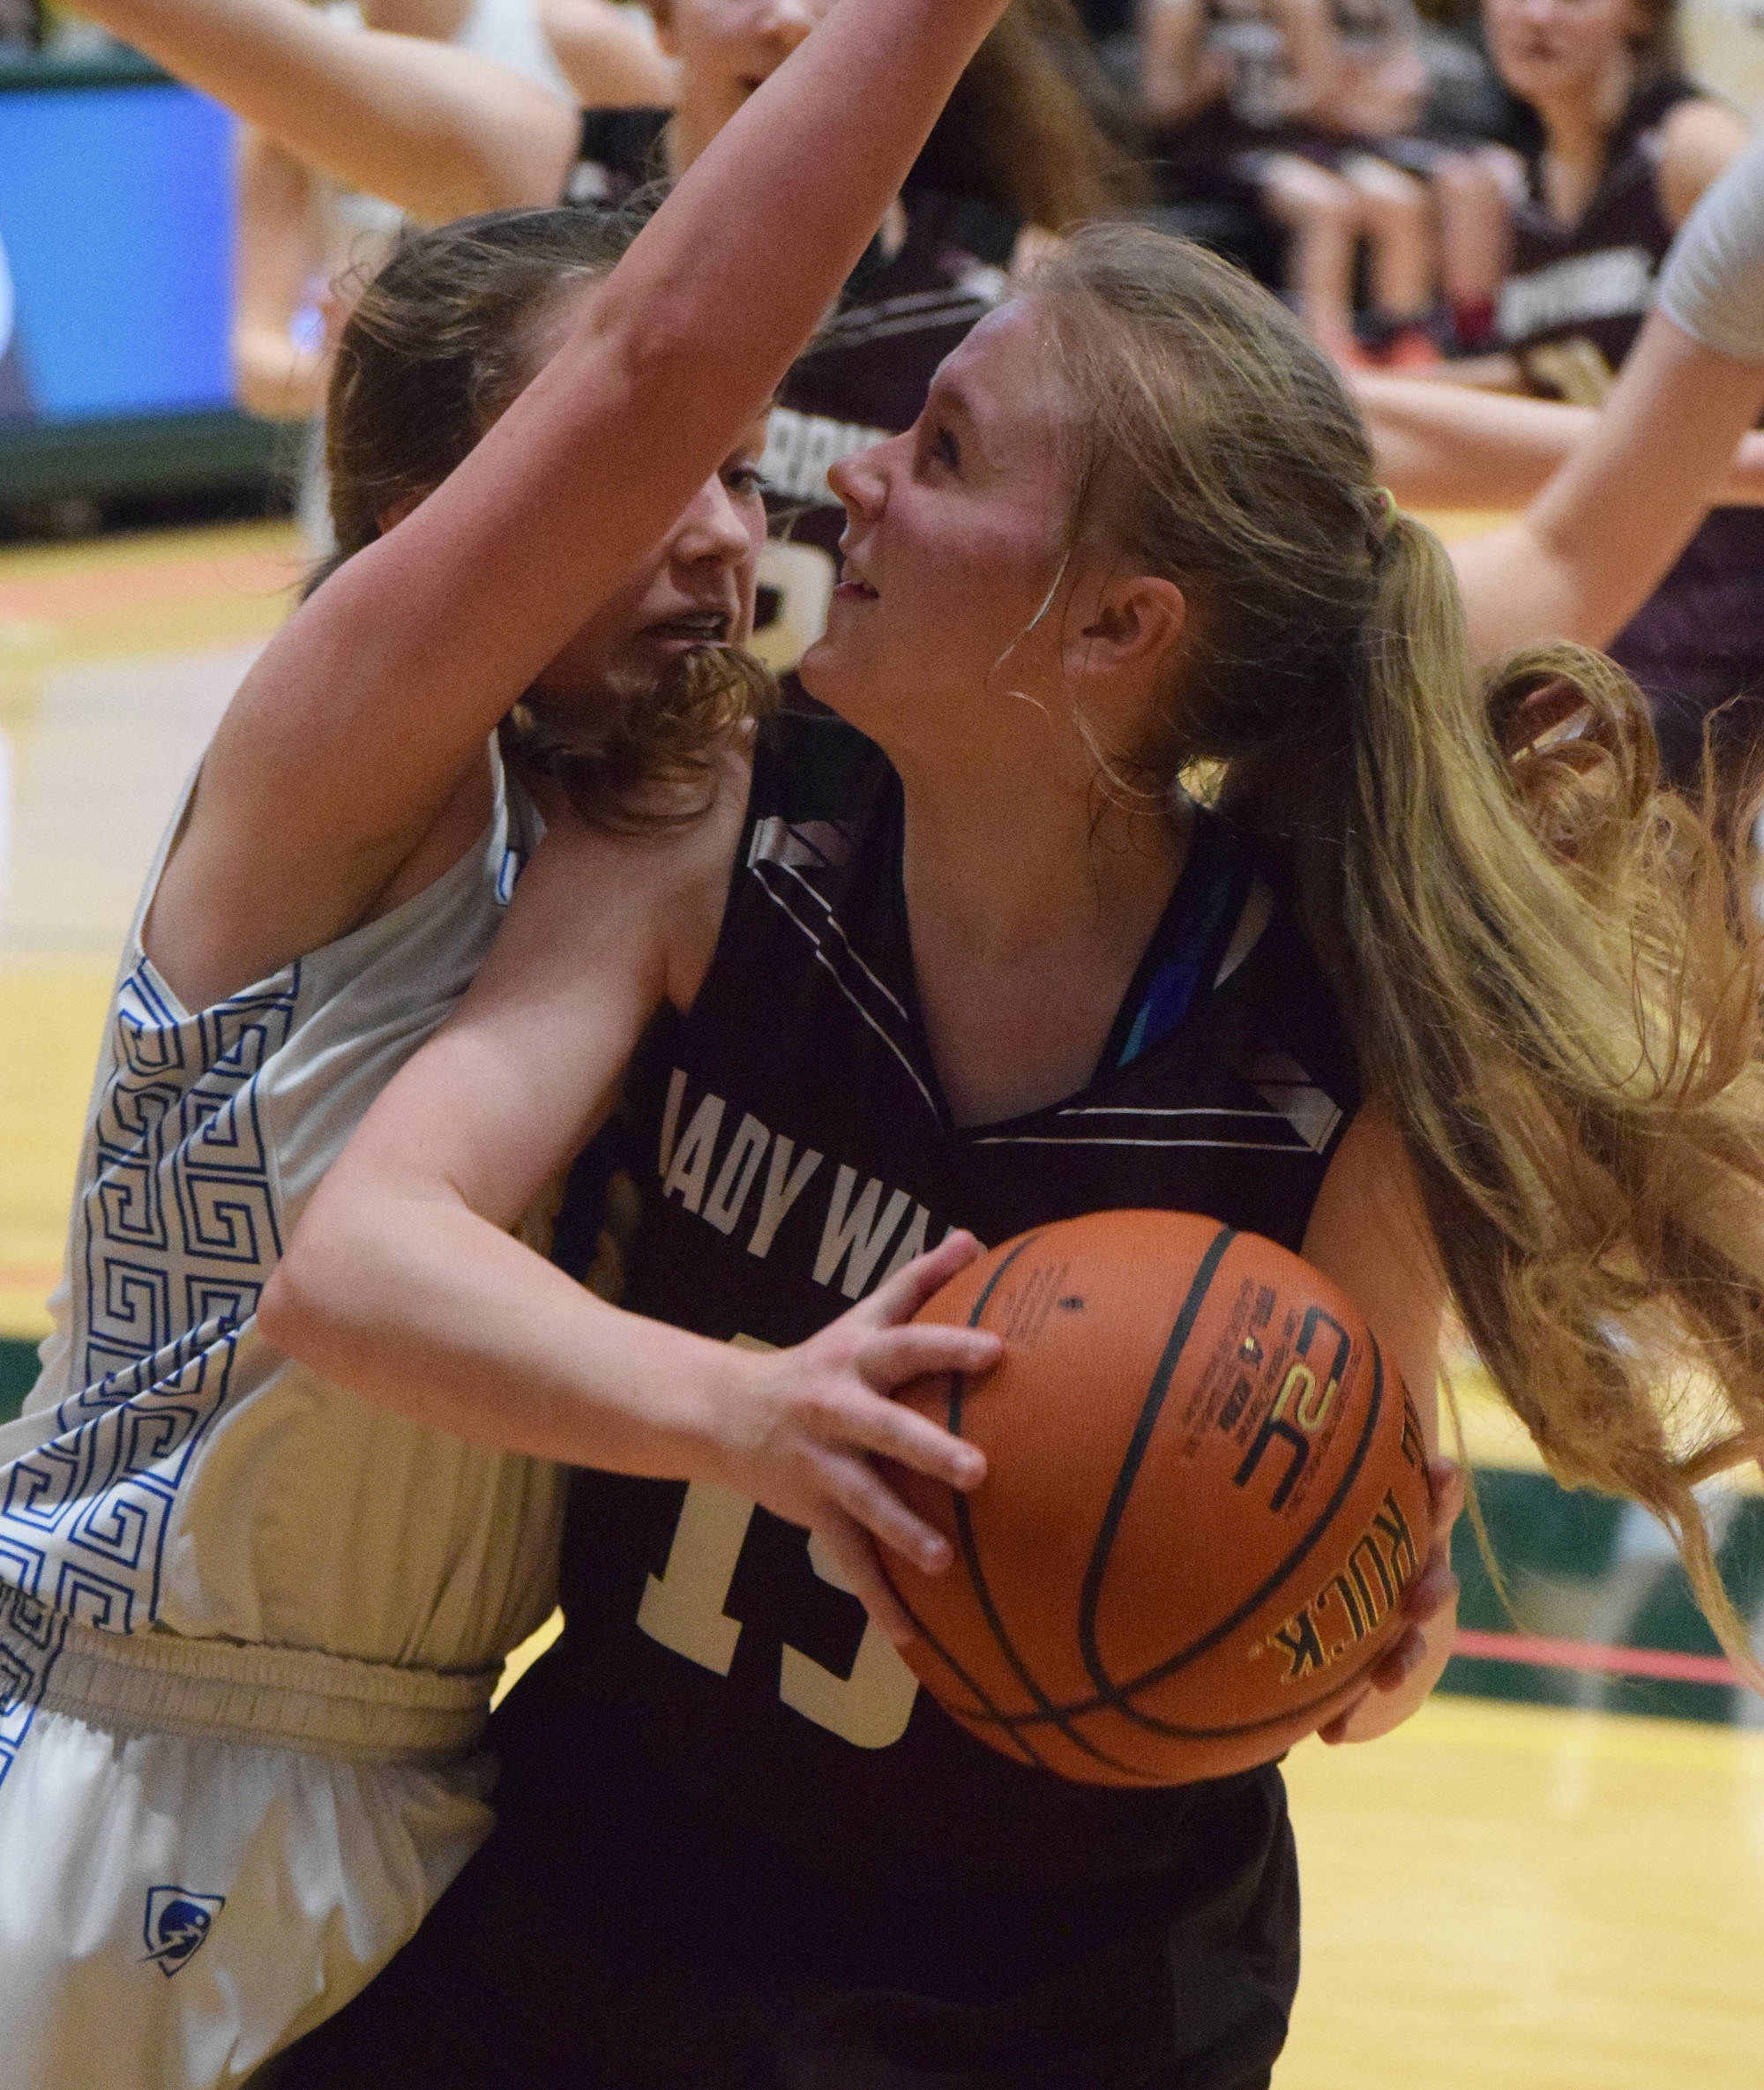 Nikolaevsk’s Markiana Yakunin (right) drives to the rim against Tri-Valley’s Jazmyn Byfluglien Thursday at the Class 1A girls state basketball tournament in Anchorage. (Photo by Joey Klecka/Peninsula Clarion)